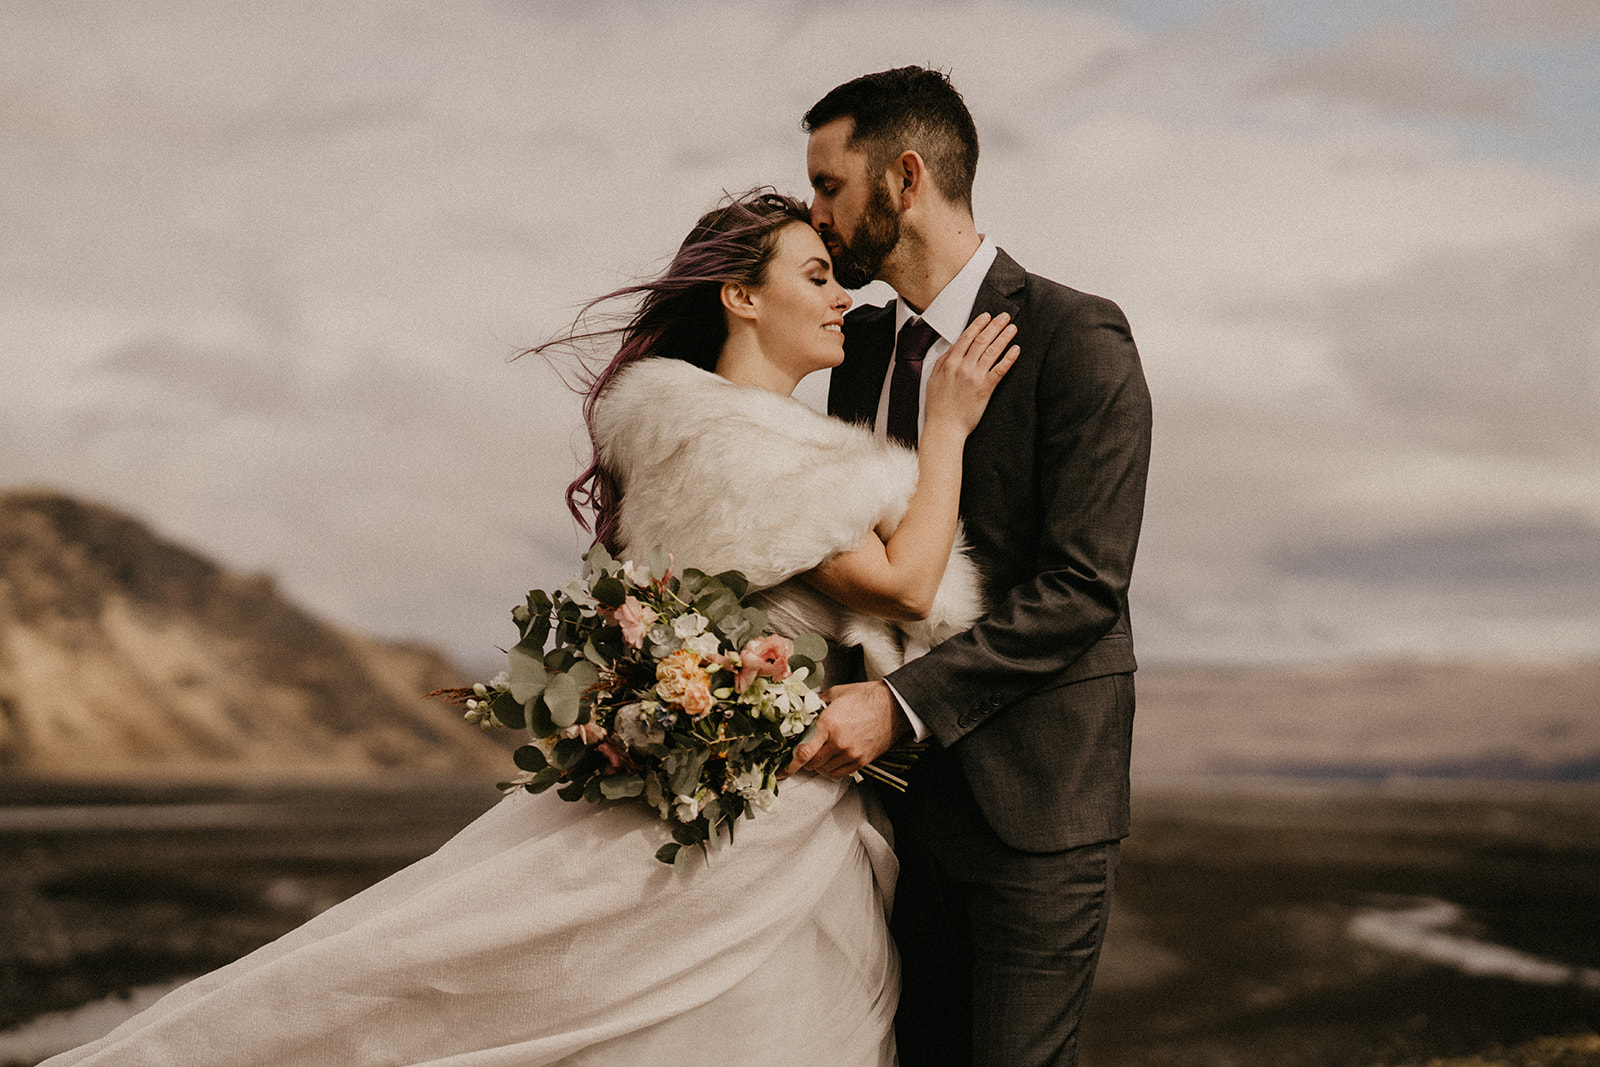 Eloping in Iceland with Stunning Travel Photography